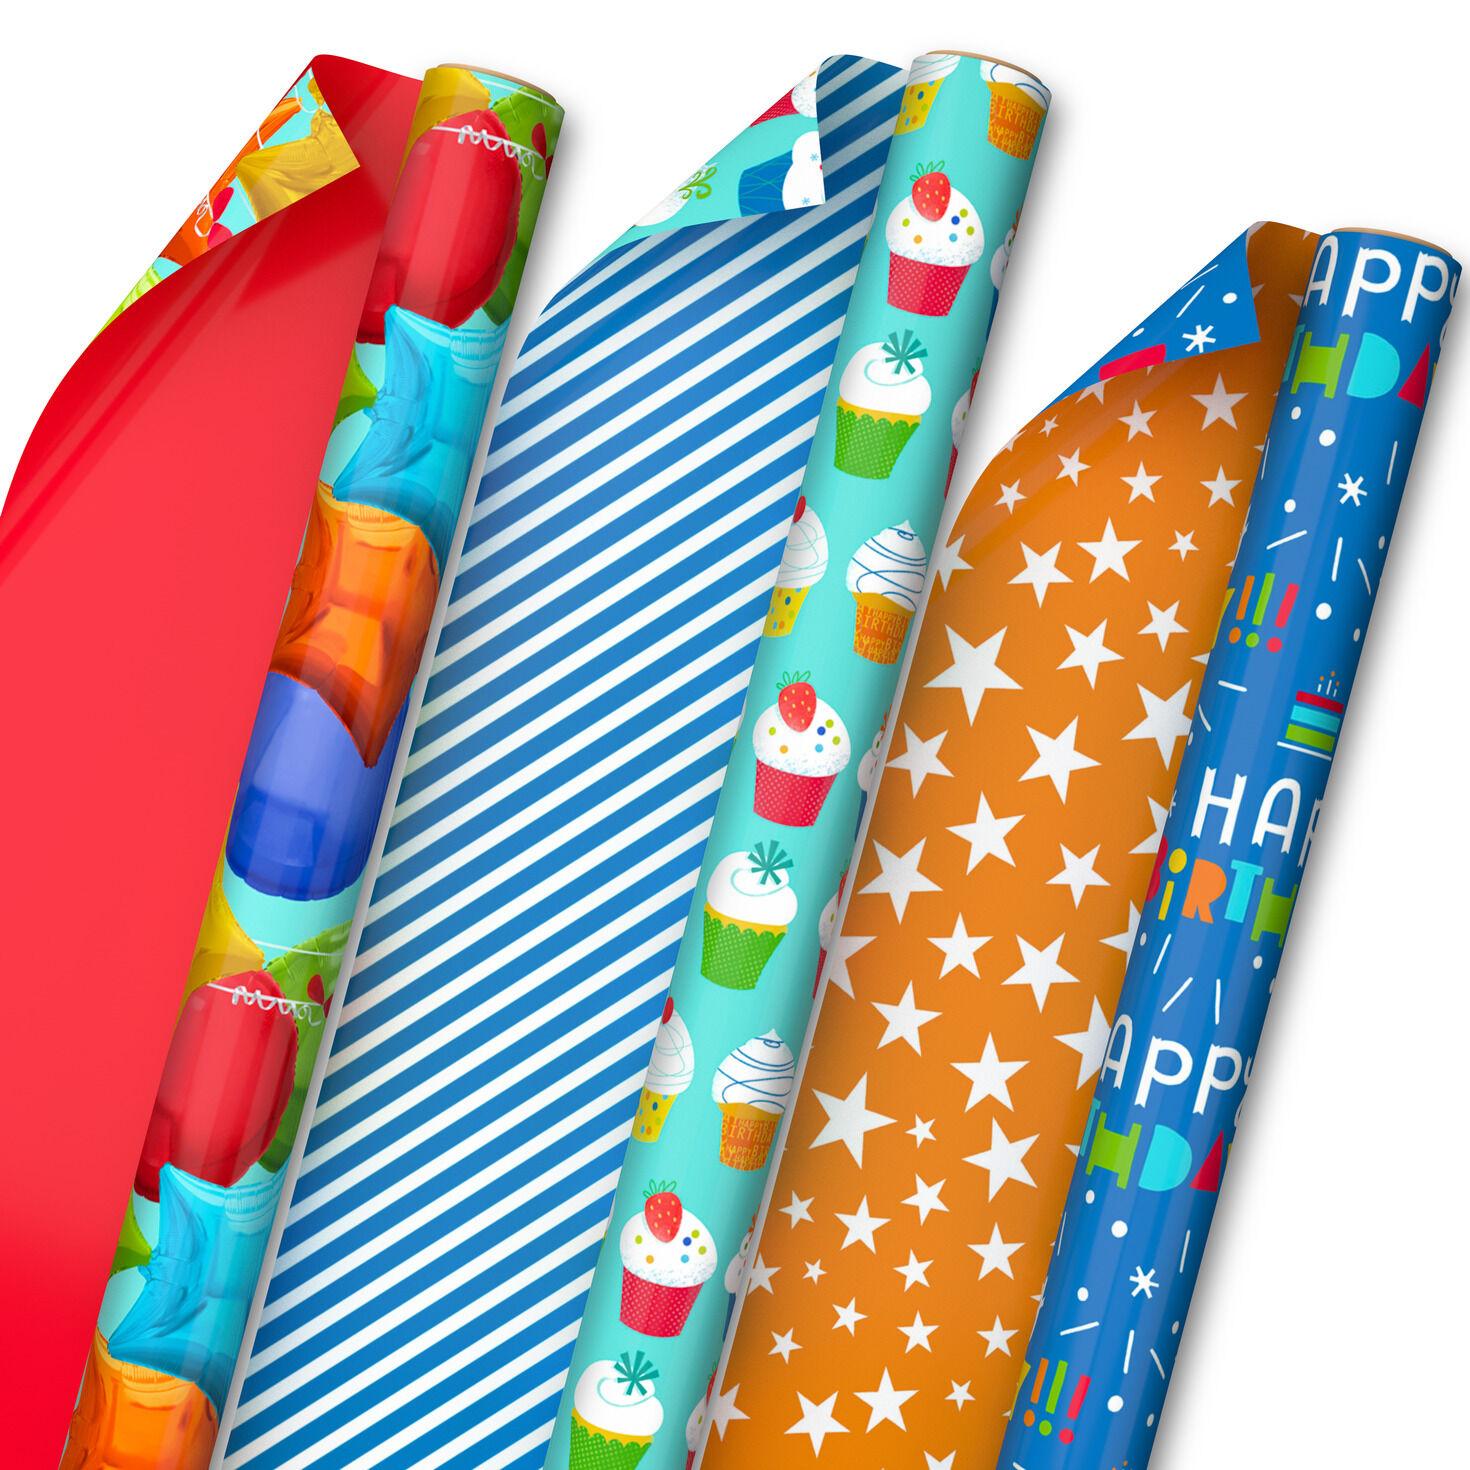 Hallmark Wrapping Paper Pad in Bold Birthday Colors